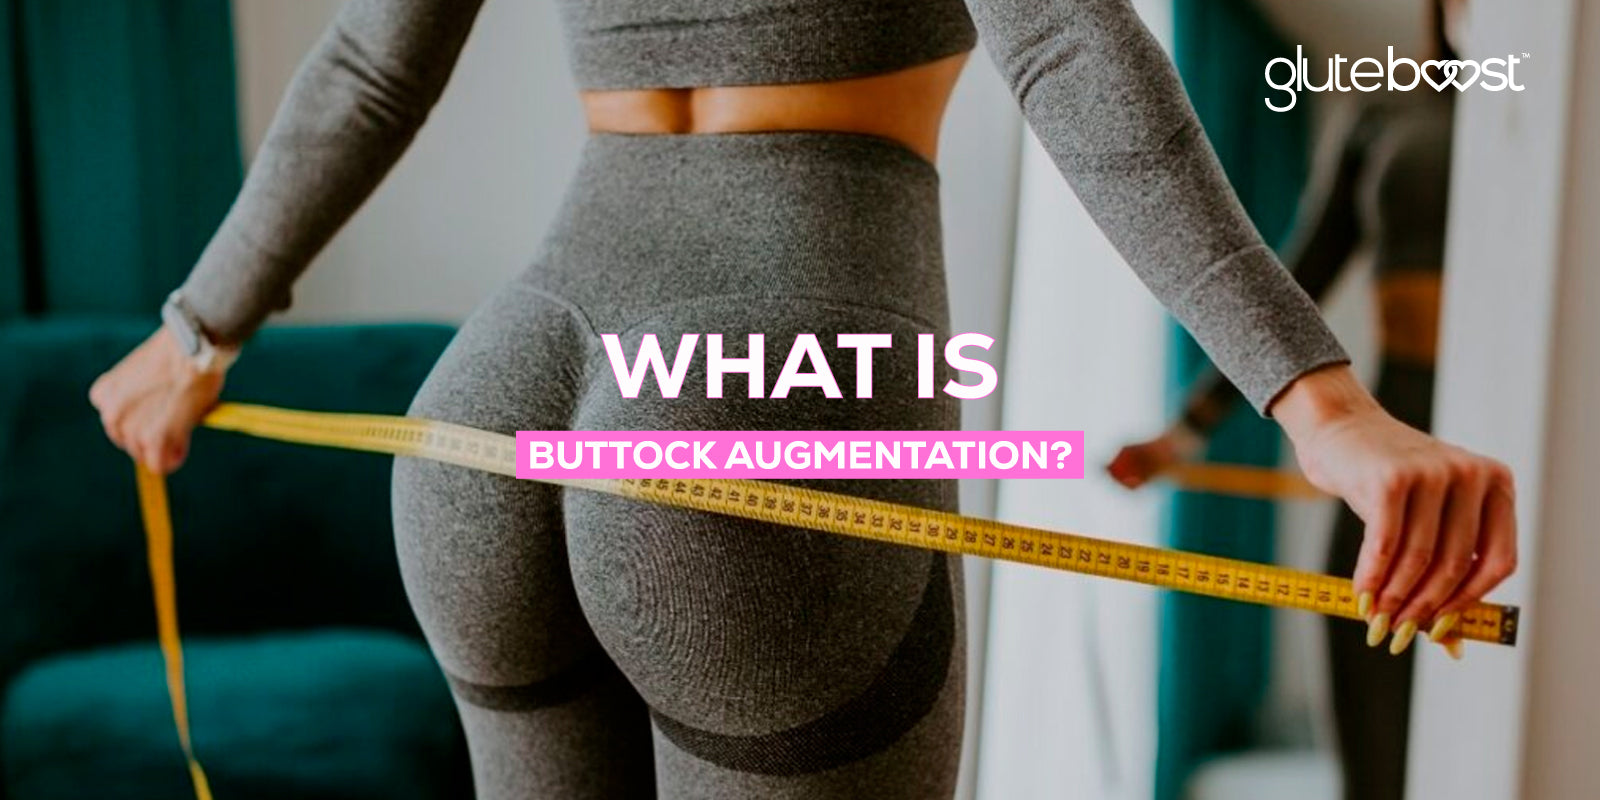 What is Buttock Augmentation?